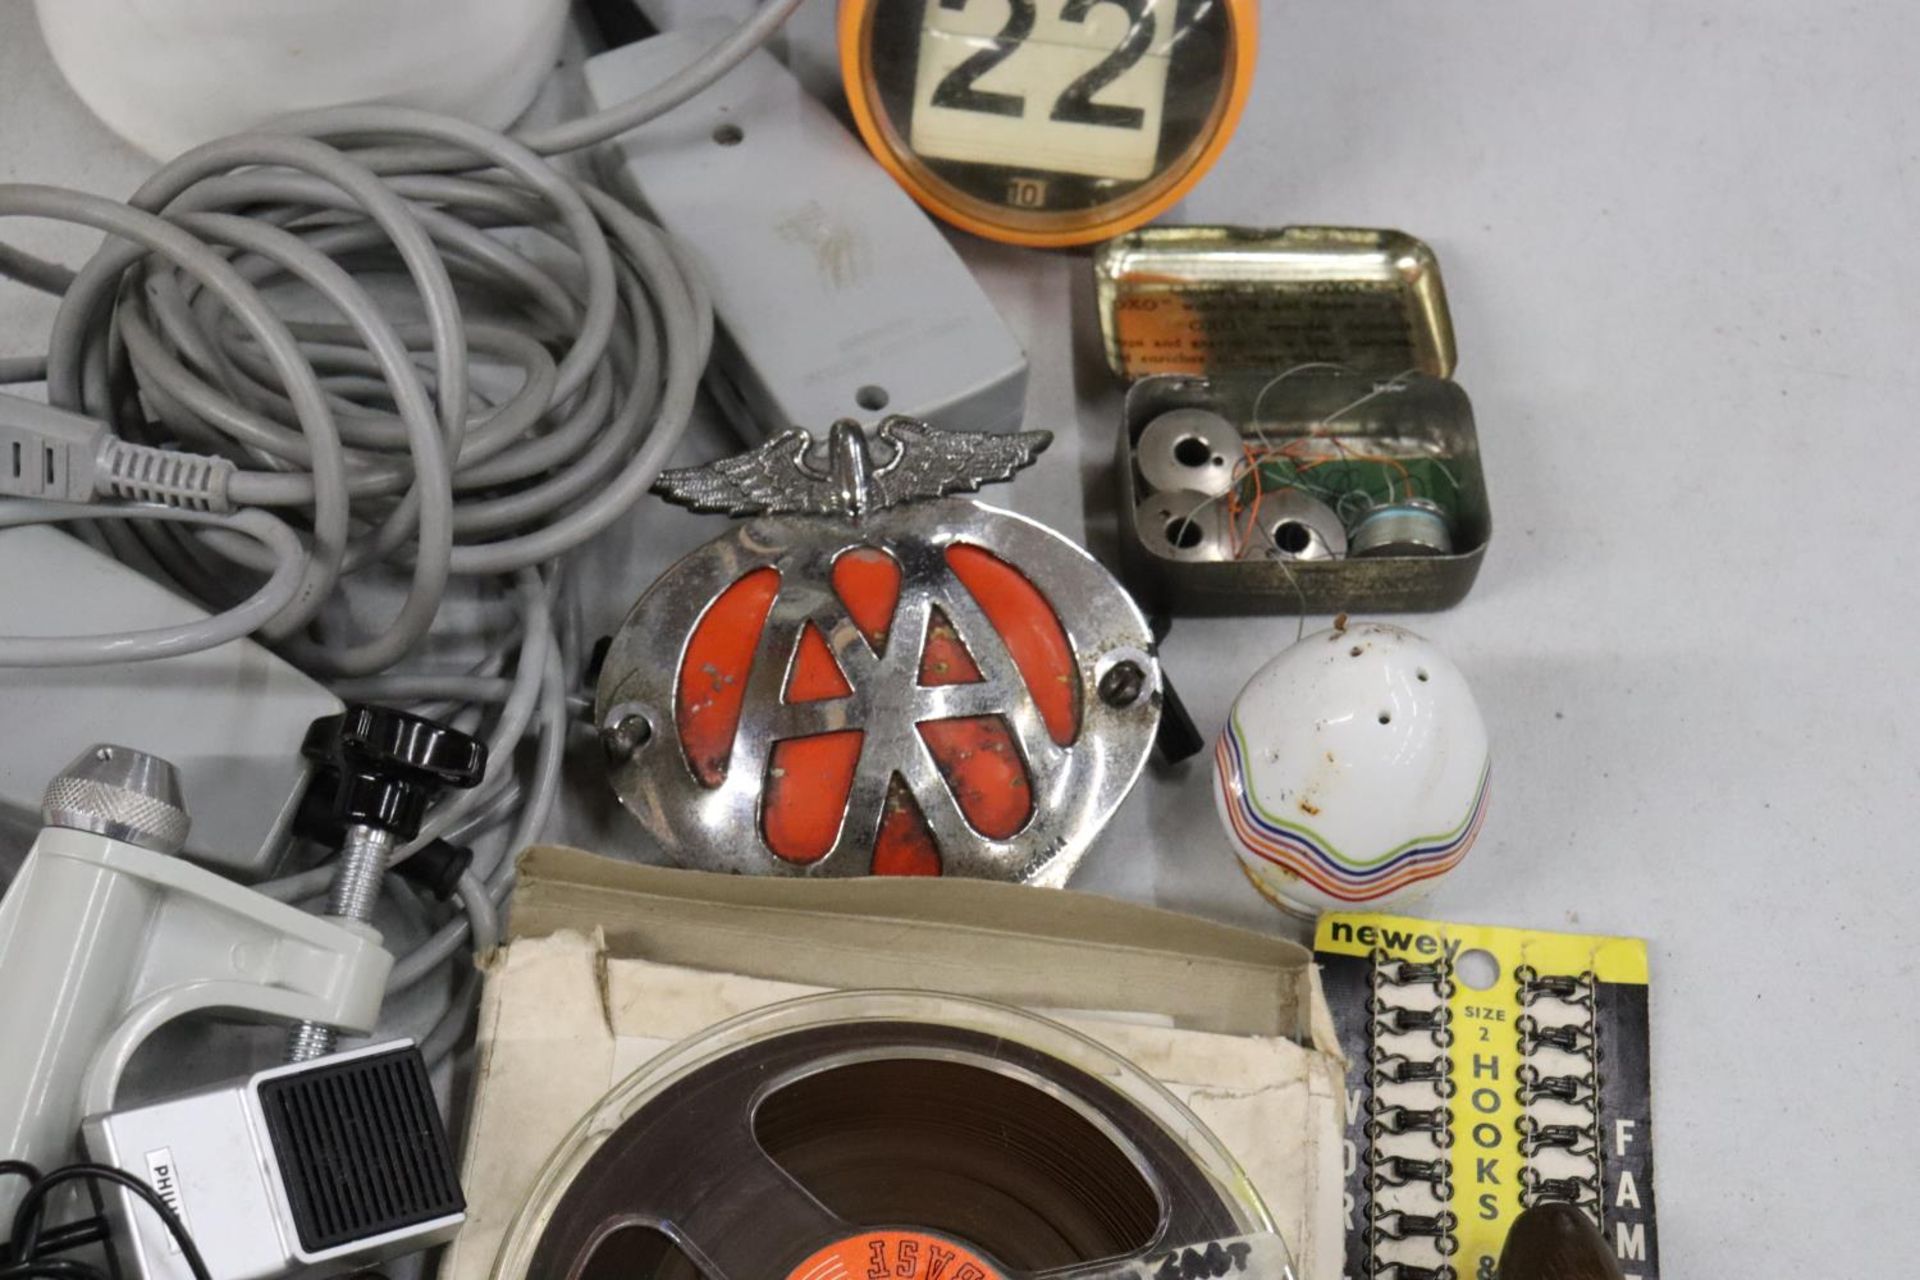 A MIXED VINTAGE LOT TO INCLUDE AN AA BADGE, DESK CALENDAR, 'MINI-COMPAS', LOCKS, GAVEL, TINS, ETC - Image 6 of 8